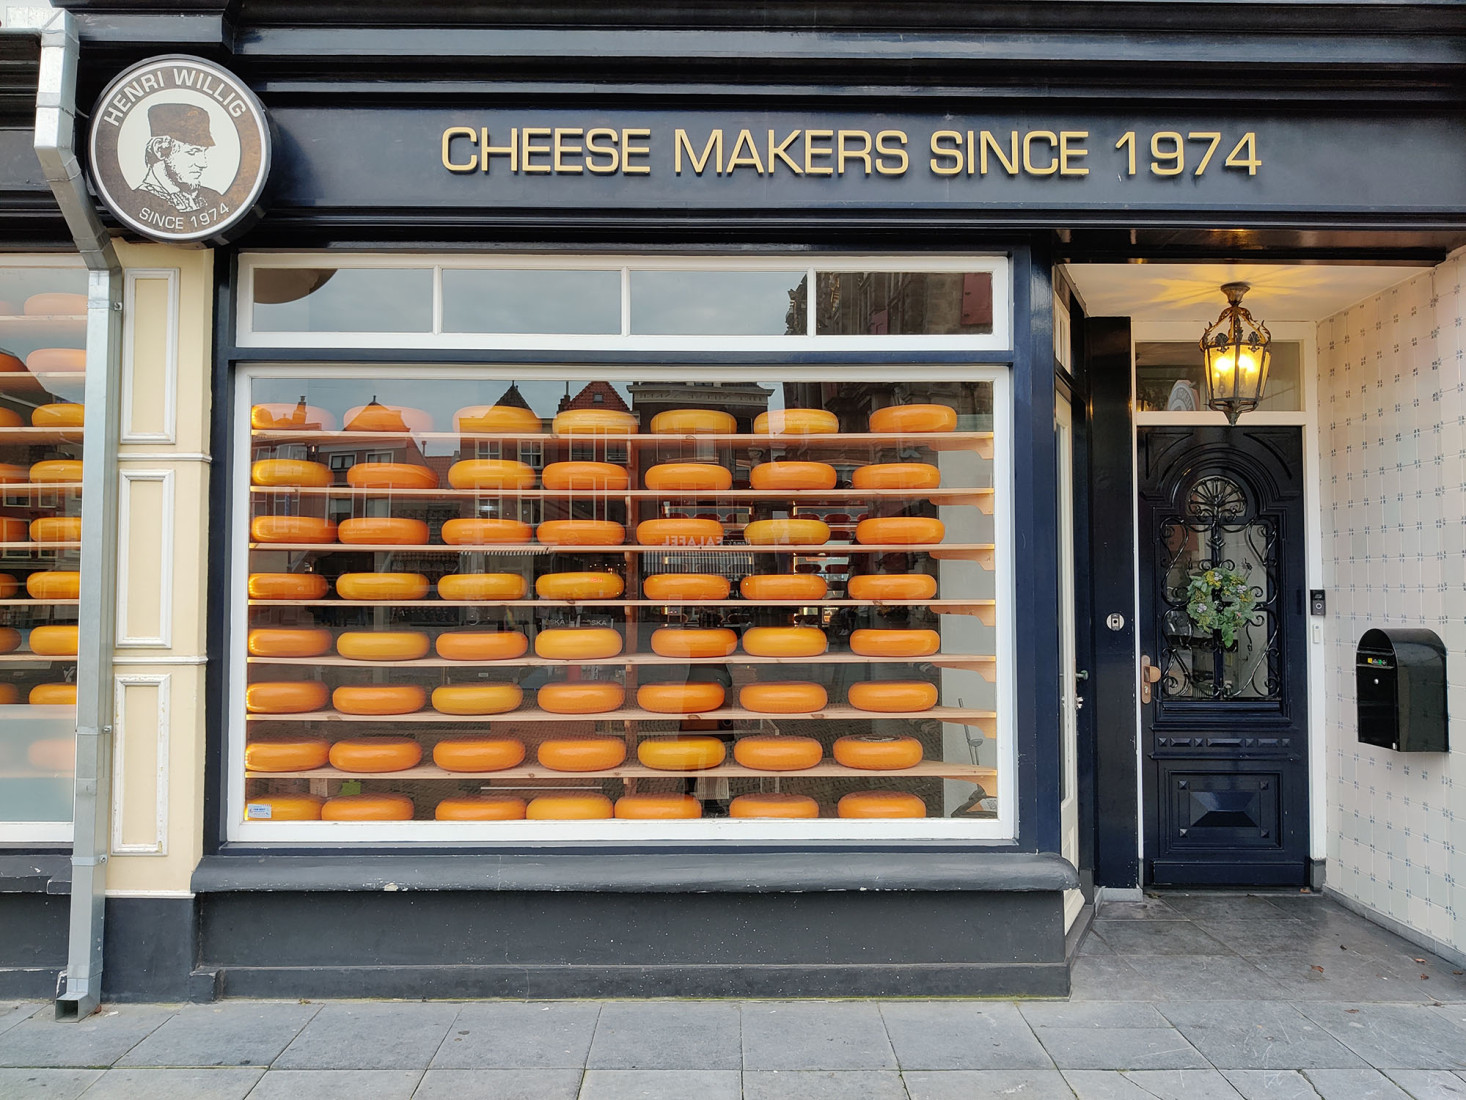 This is a cheese shop chain addressed to tourists, but it's a good shot